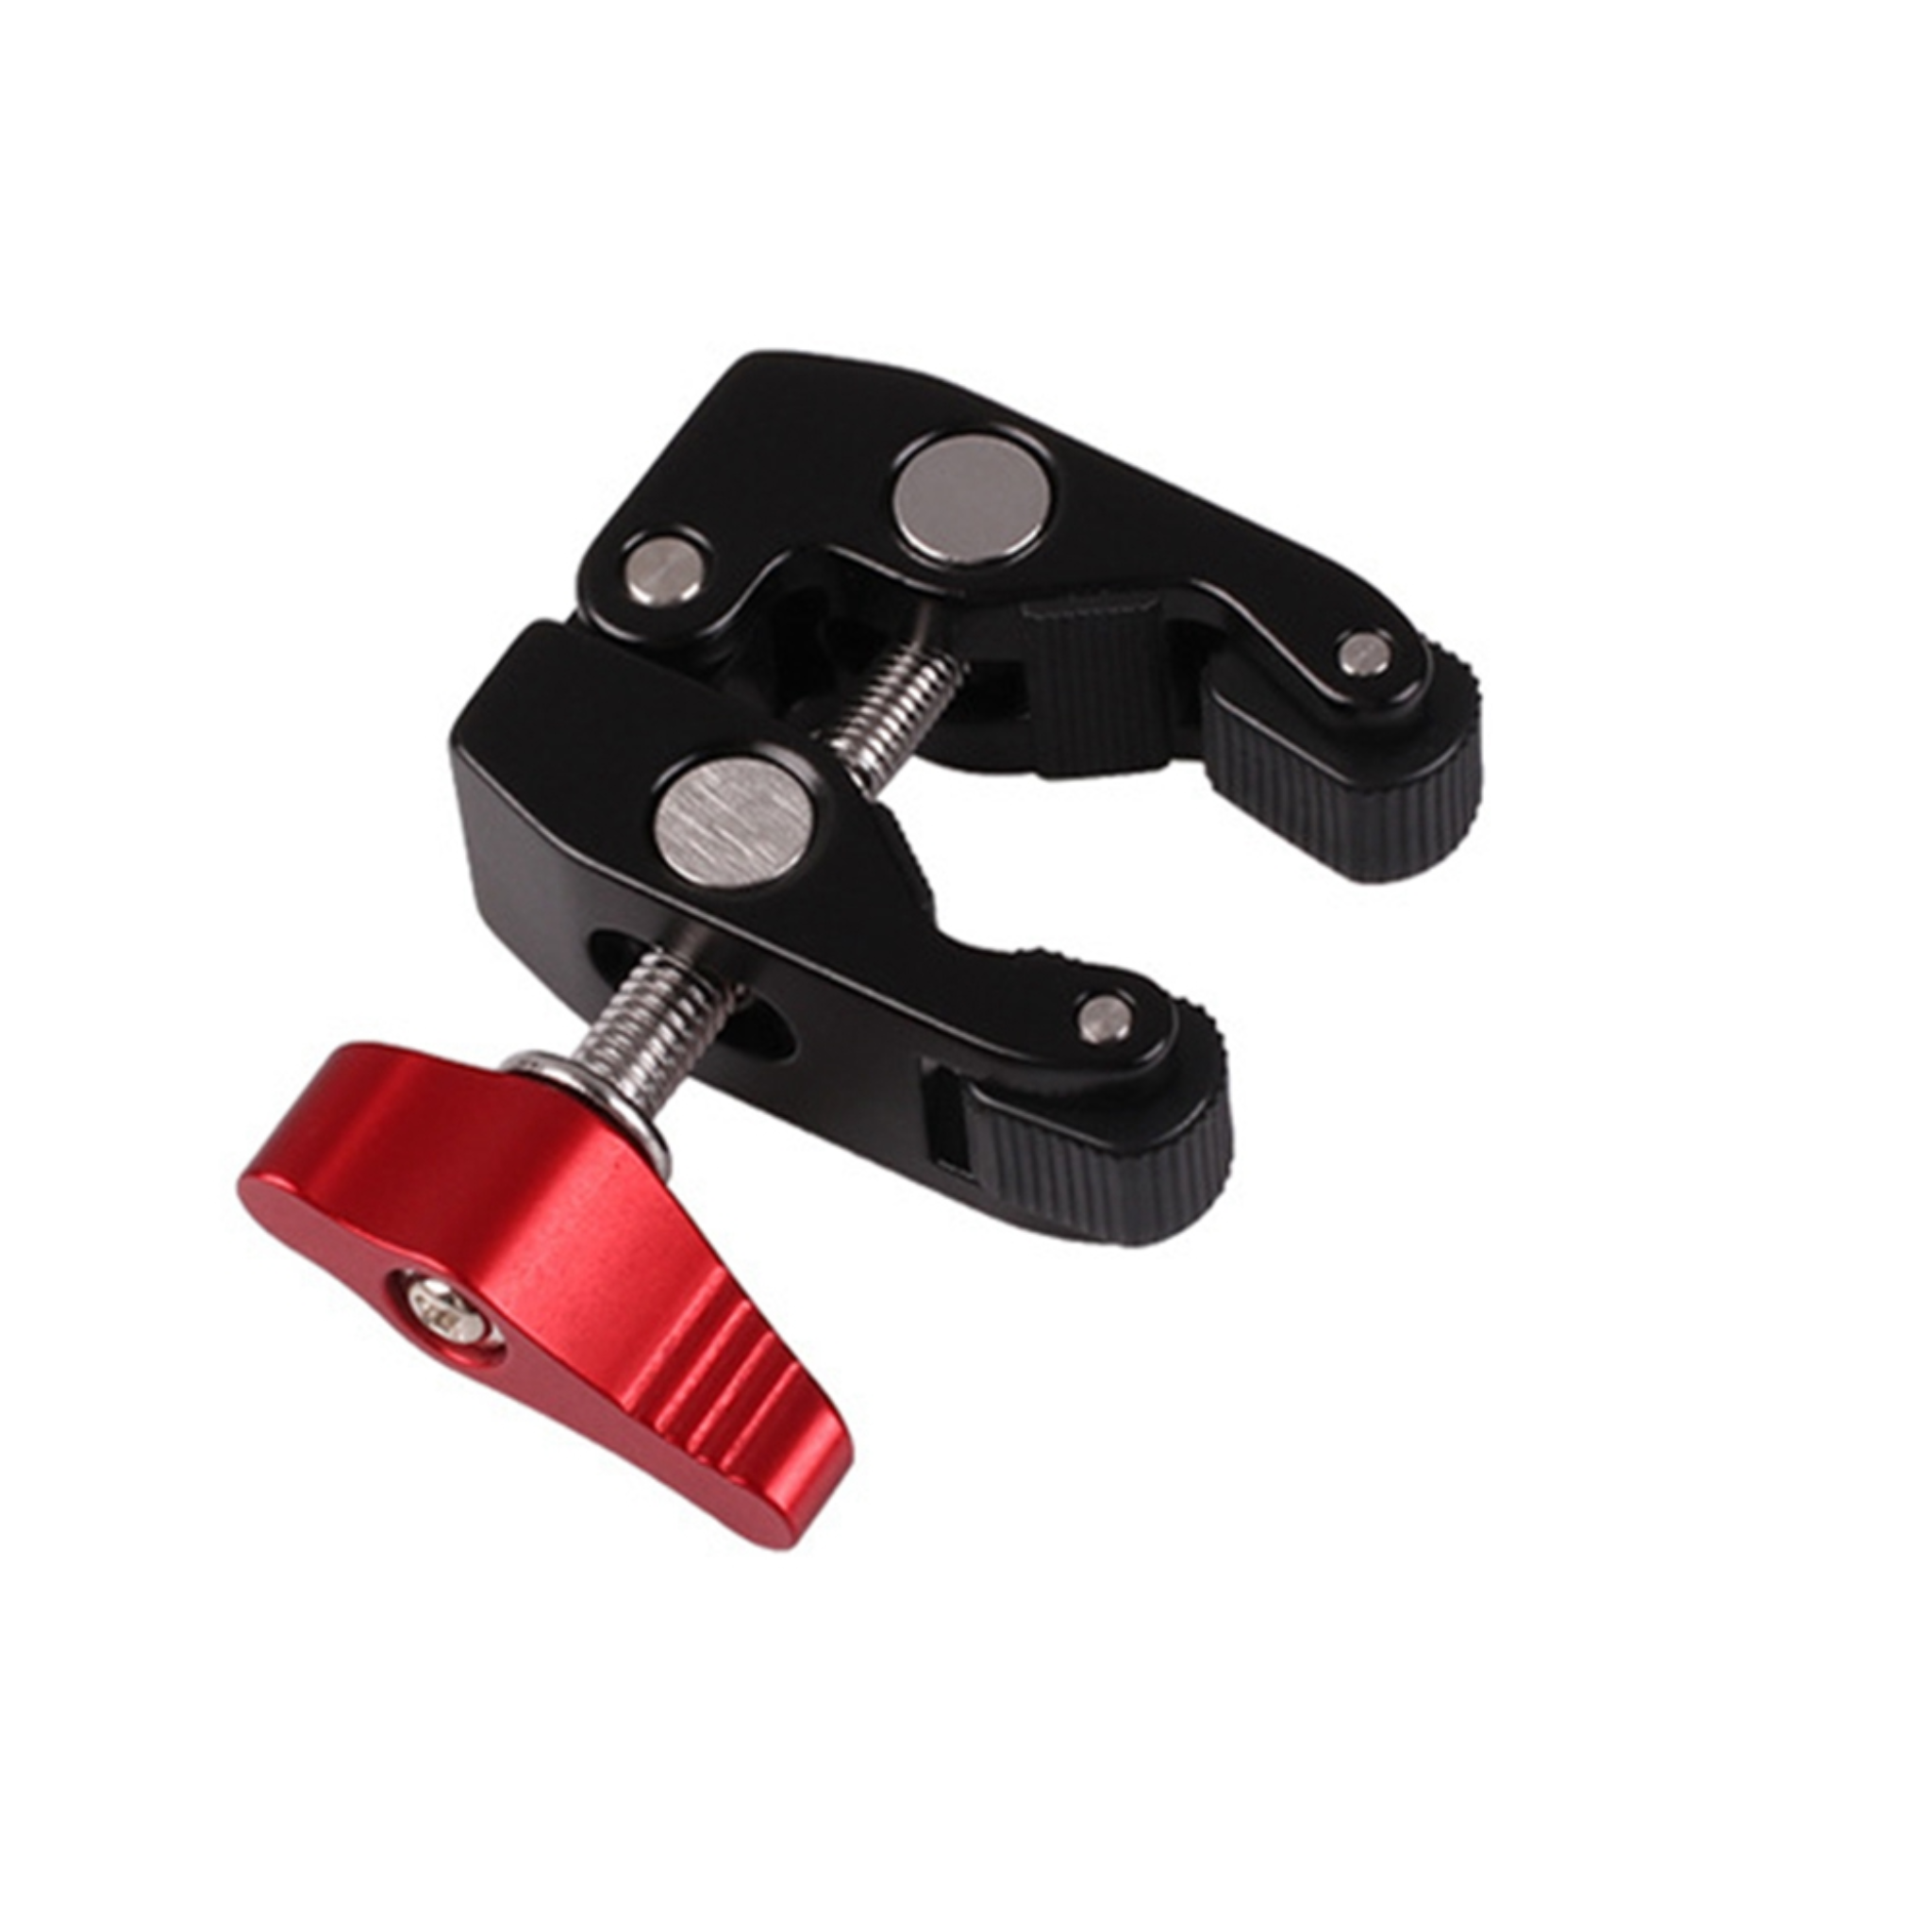 Camera Clamp Crab, with Rubber & Metal Material